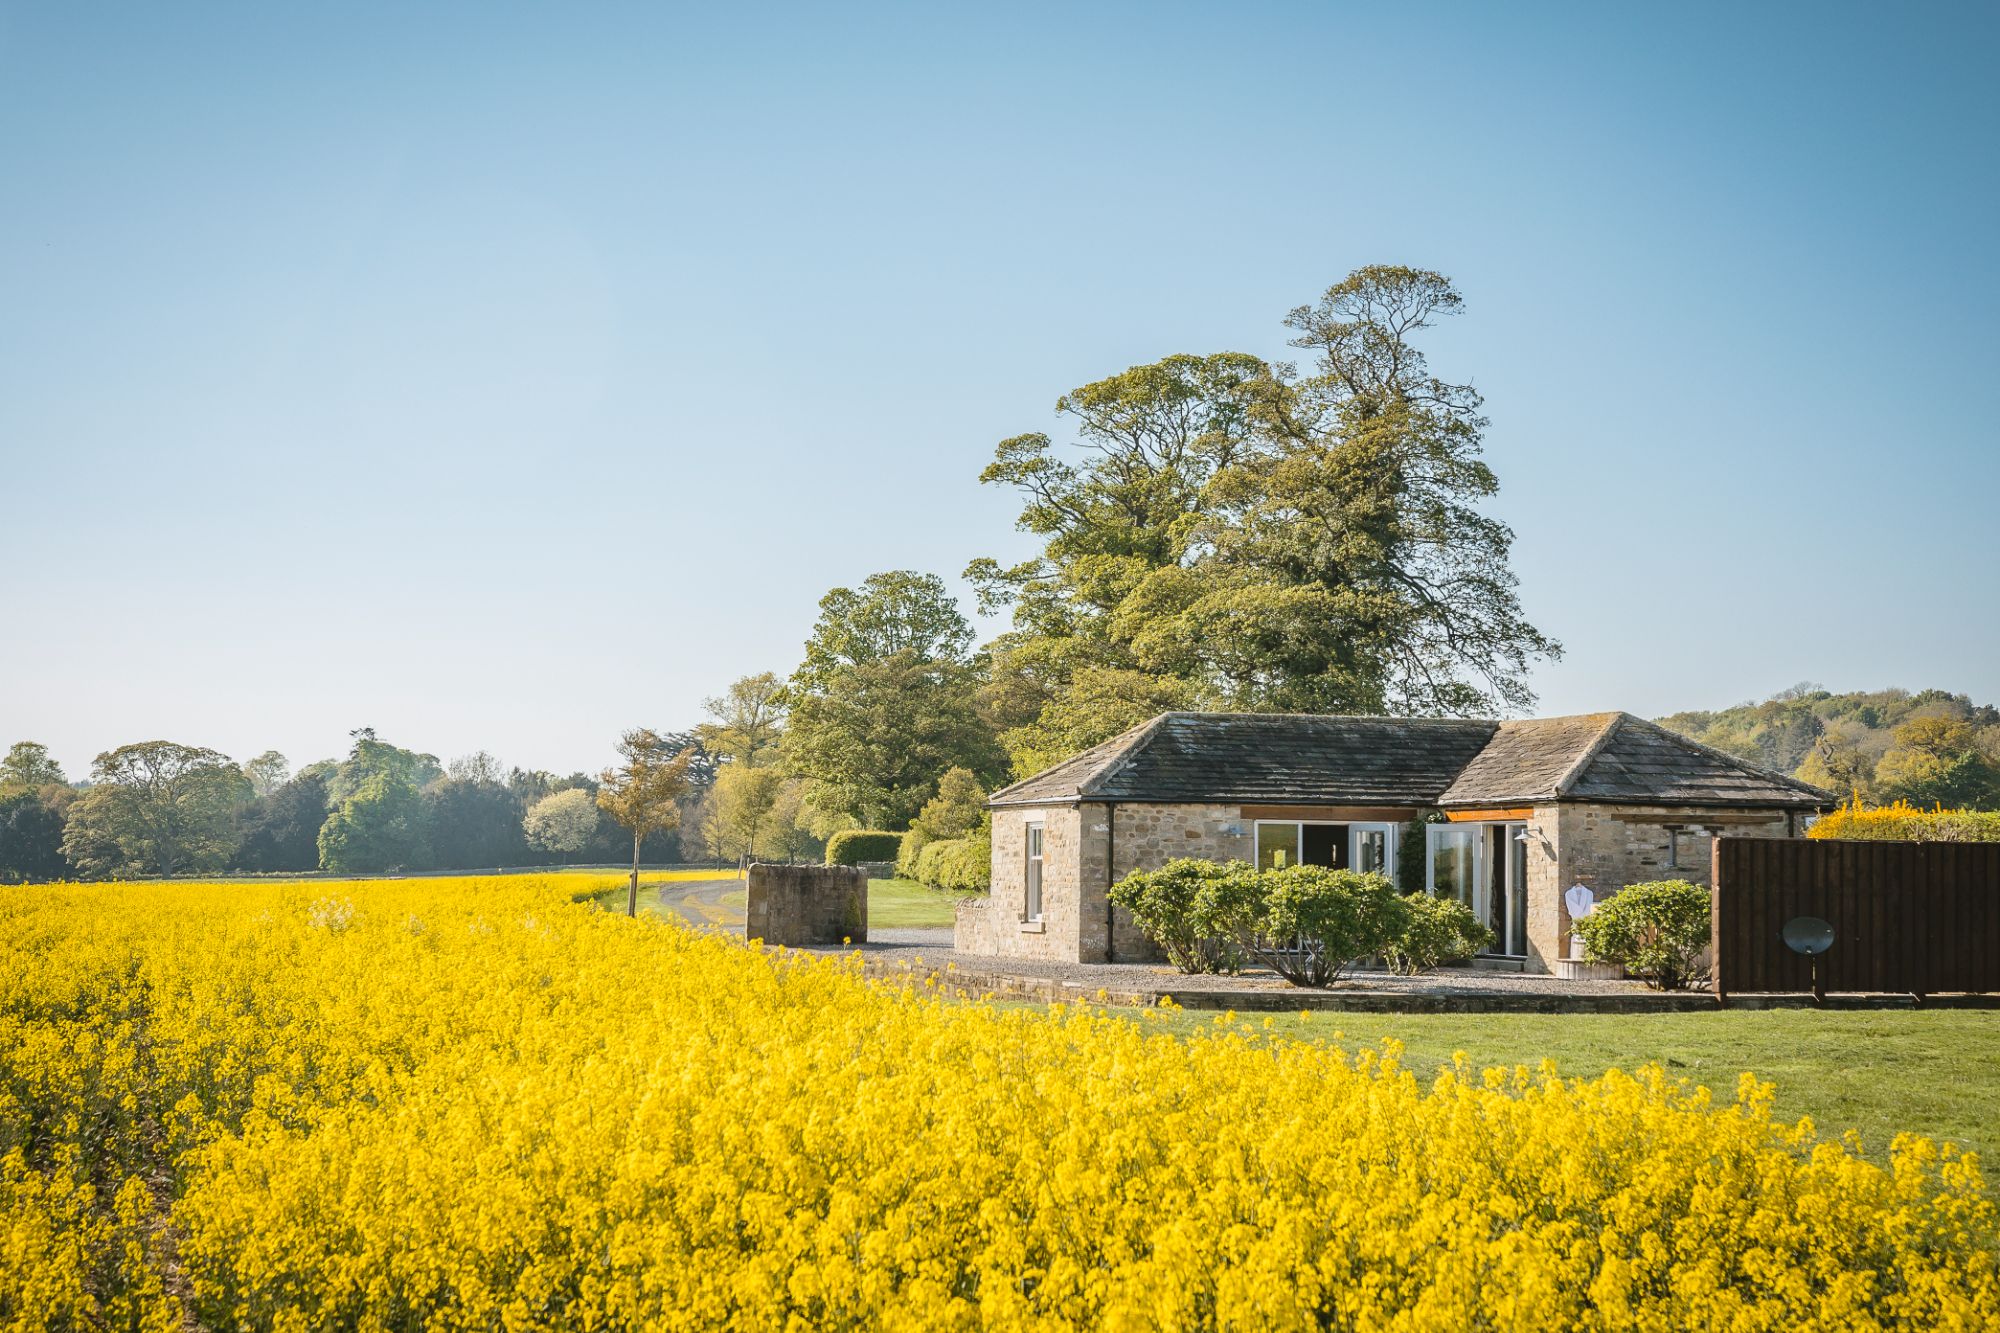 Yorkshire holiday cottages to rent